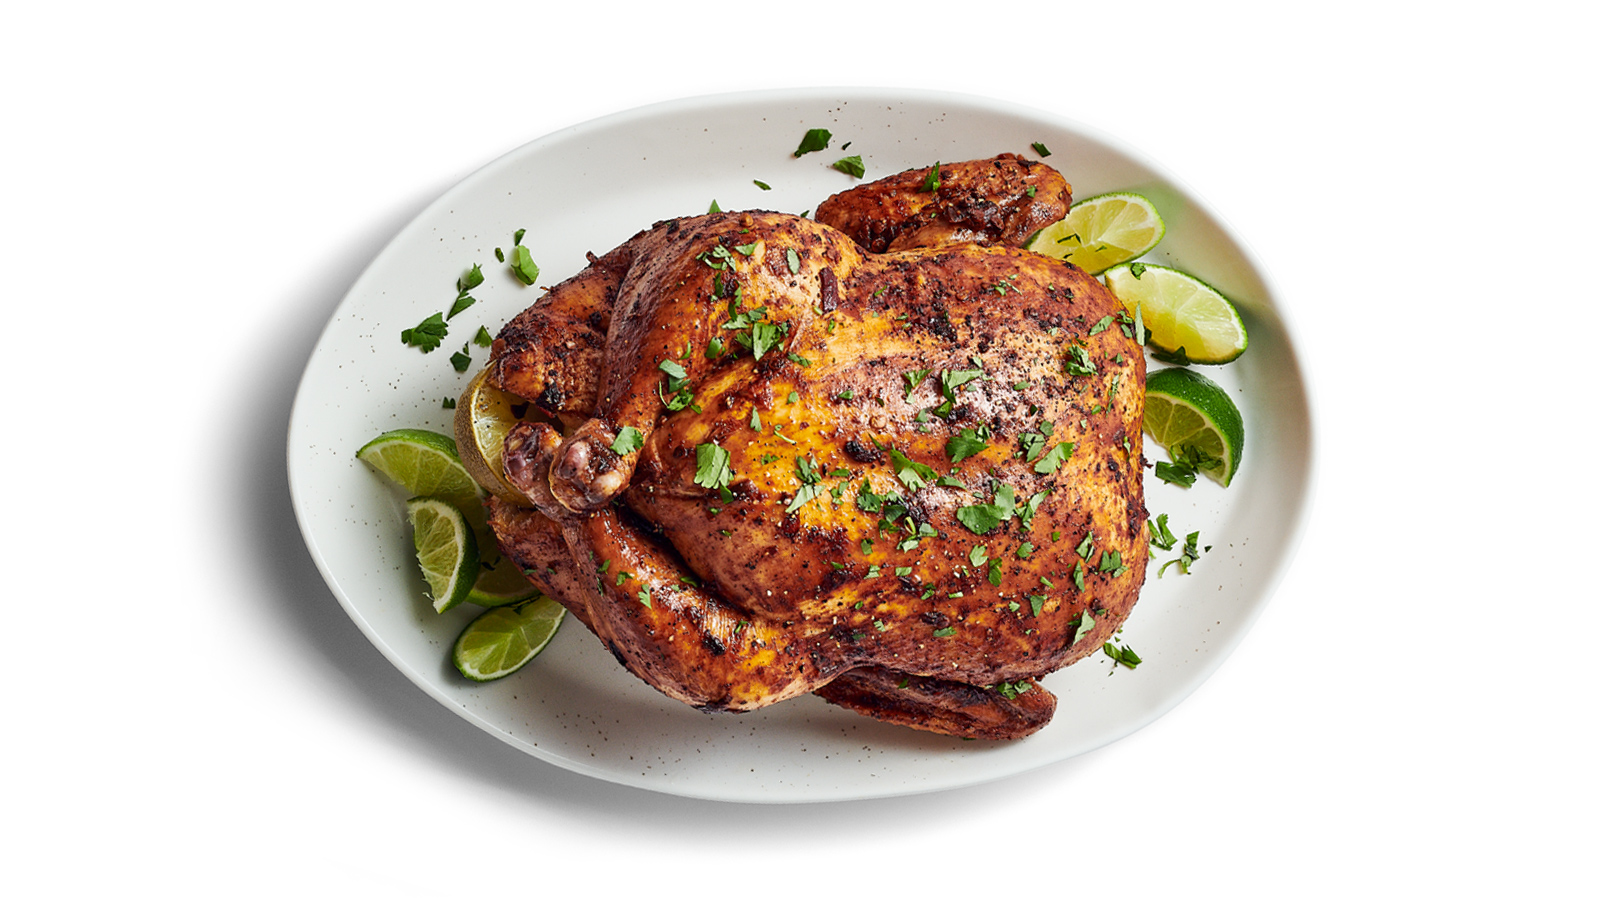 Whole roasted chicken with lime and cilantro on plate